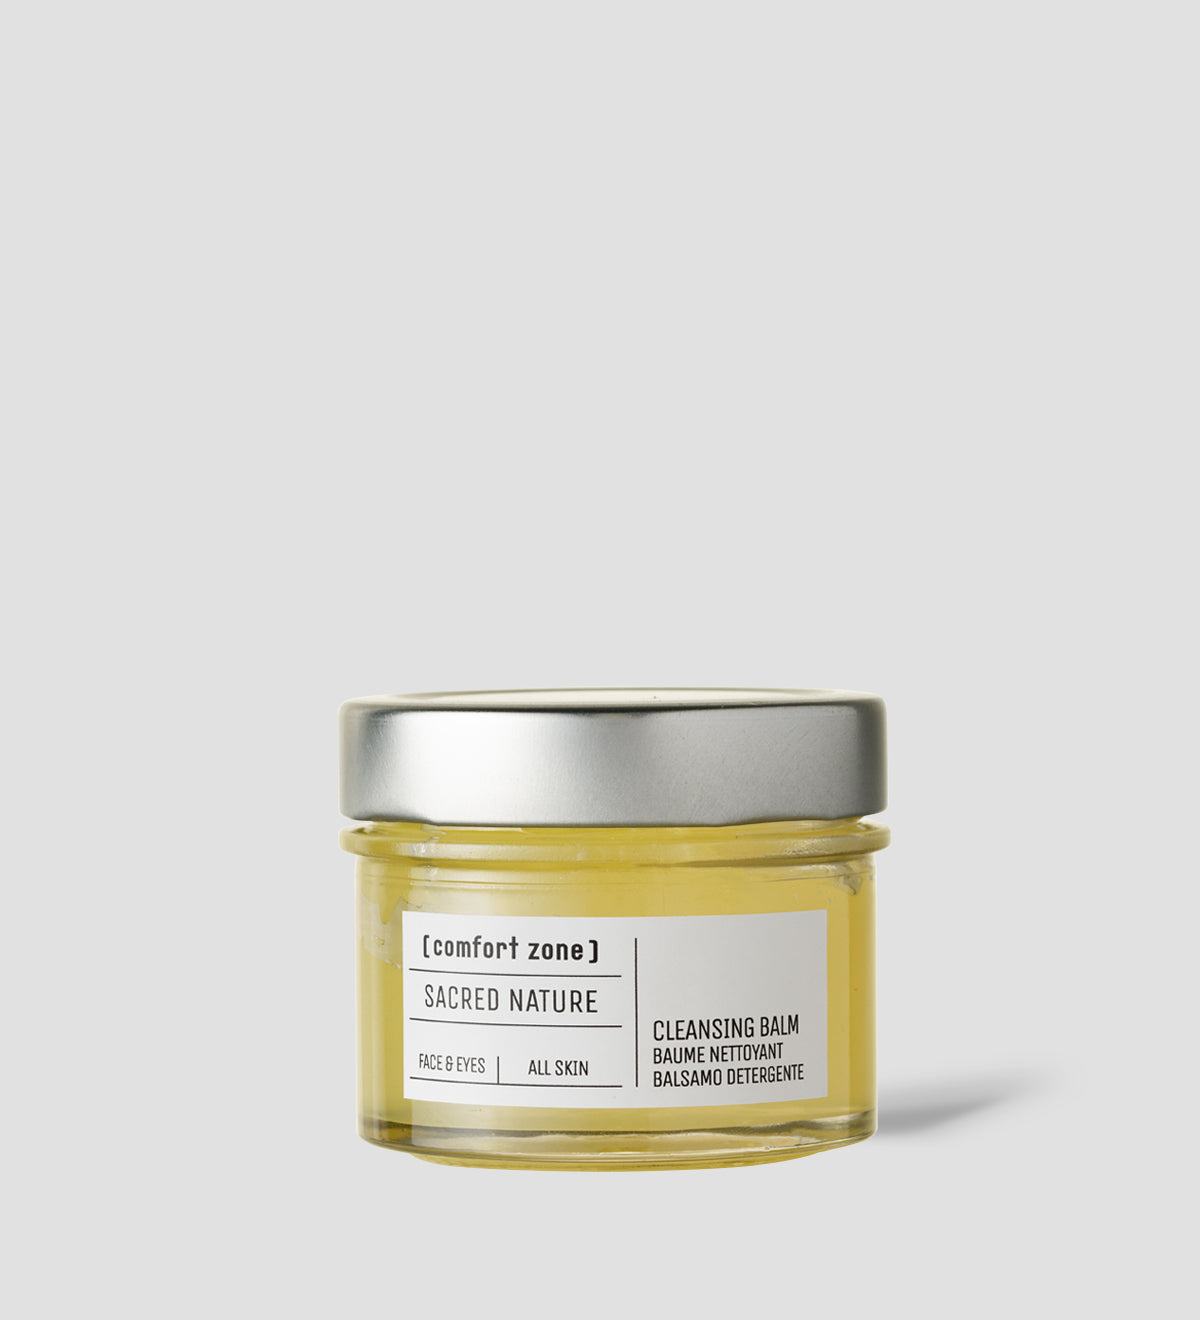 Comfort Zone: SACRED NATURE CLEANSING BALM Balsamo detergente-